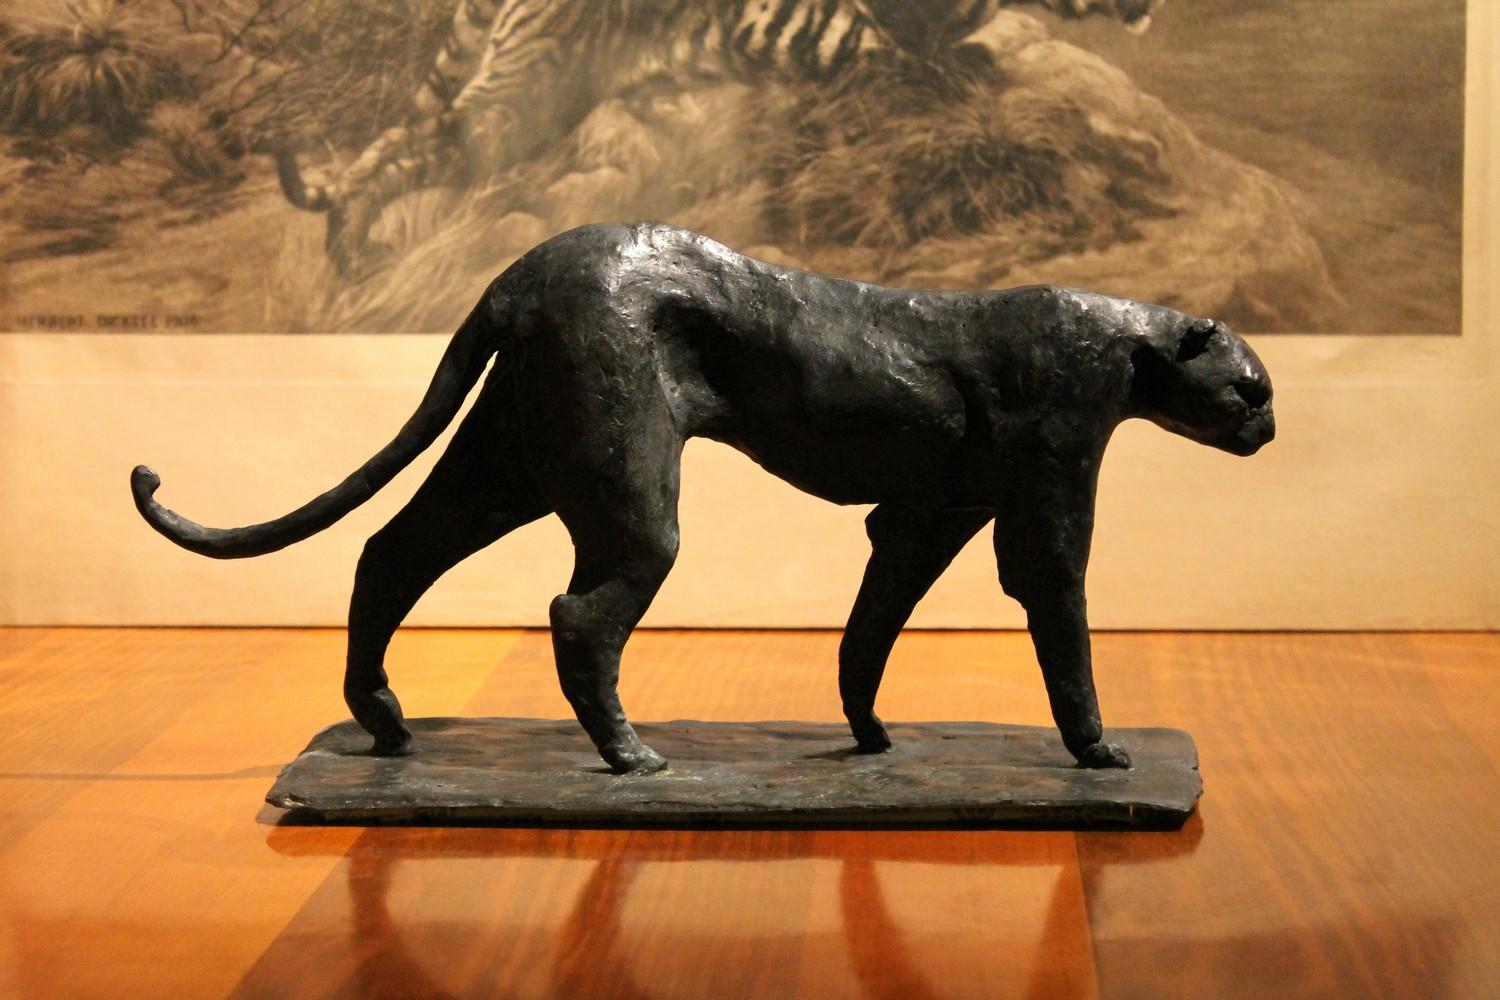 This contemporary sculpture representing a walking leopard on a rectangular naturalistic base is made of solid burnished black patinated bronze, created by the Argentine-Italian artist Pablo Simunovic through the ancient lost wax casting method.